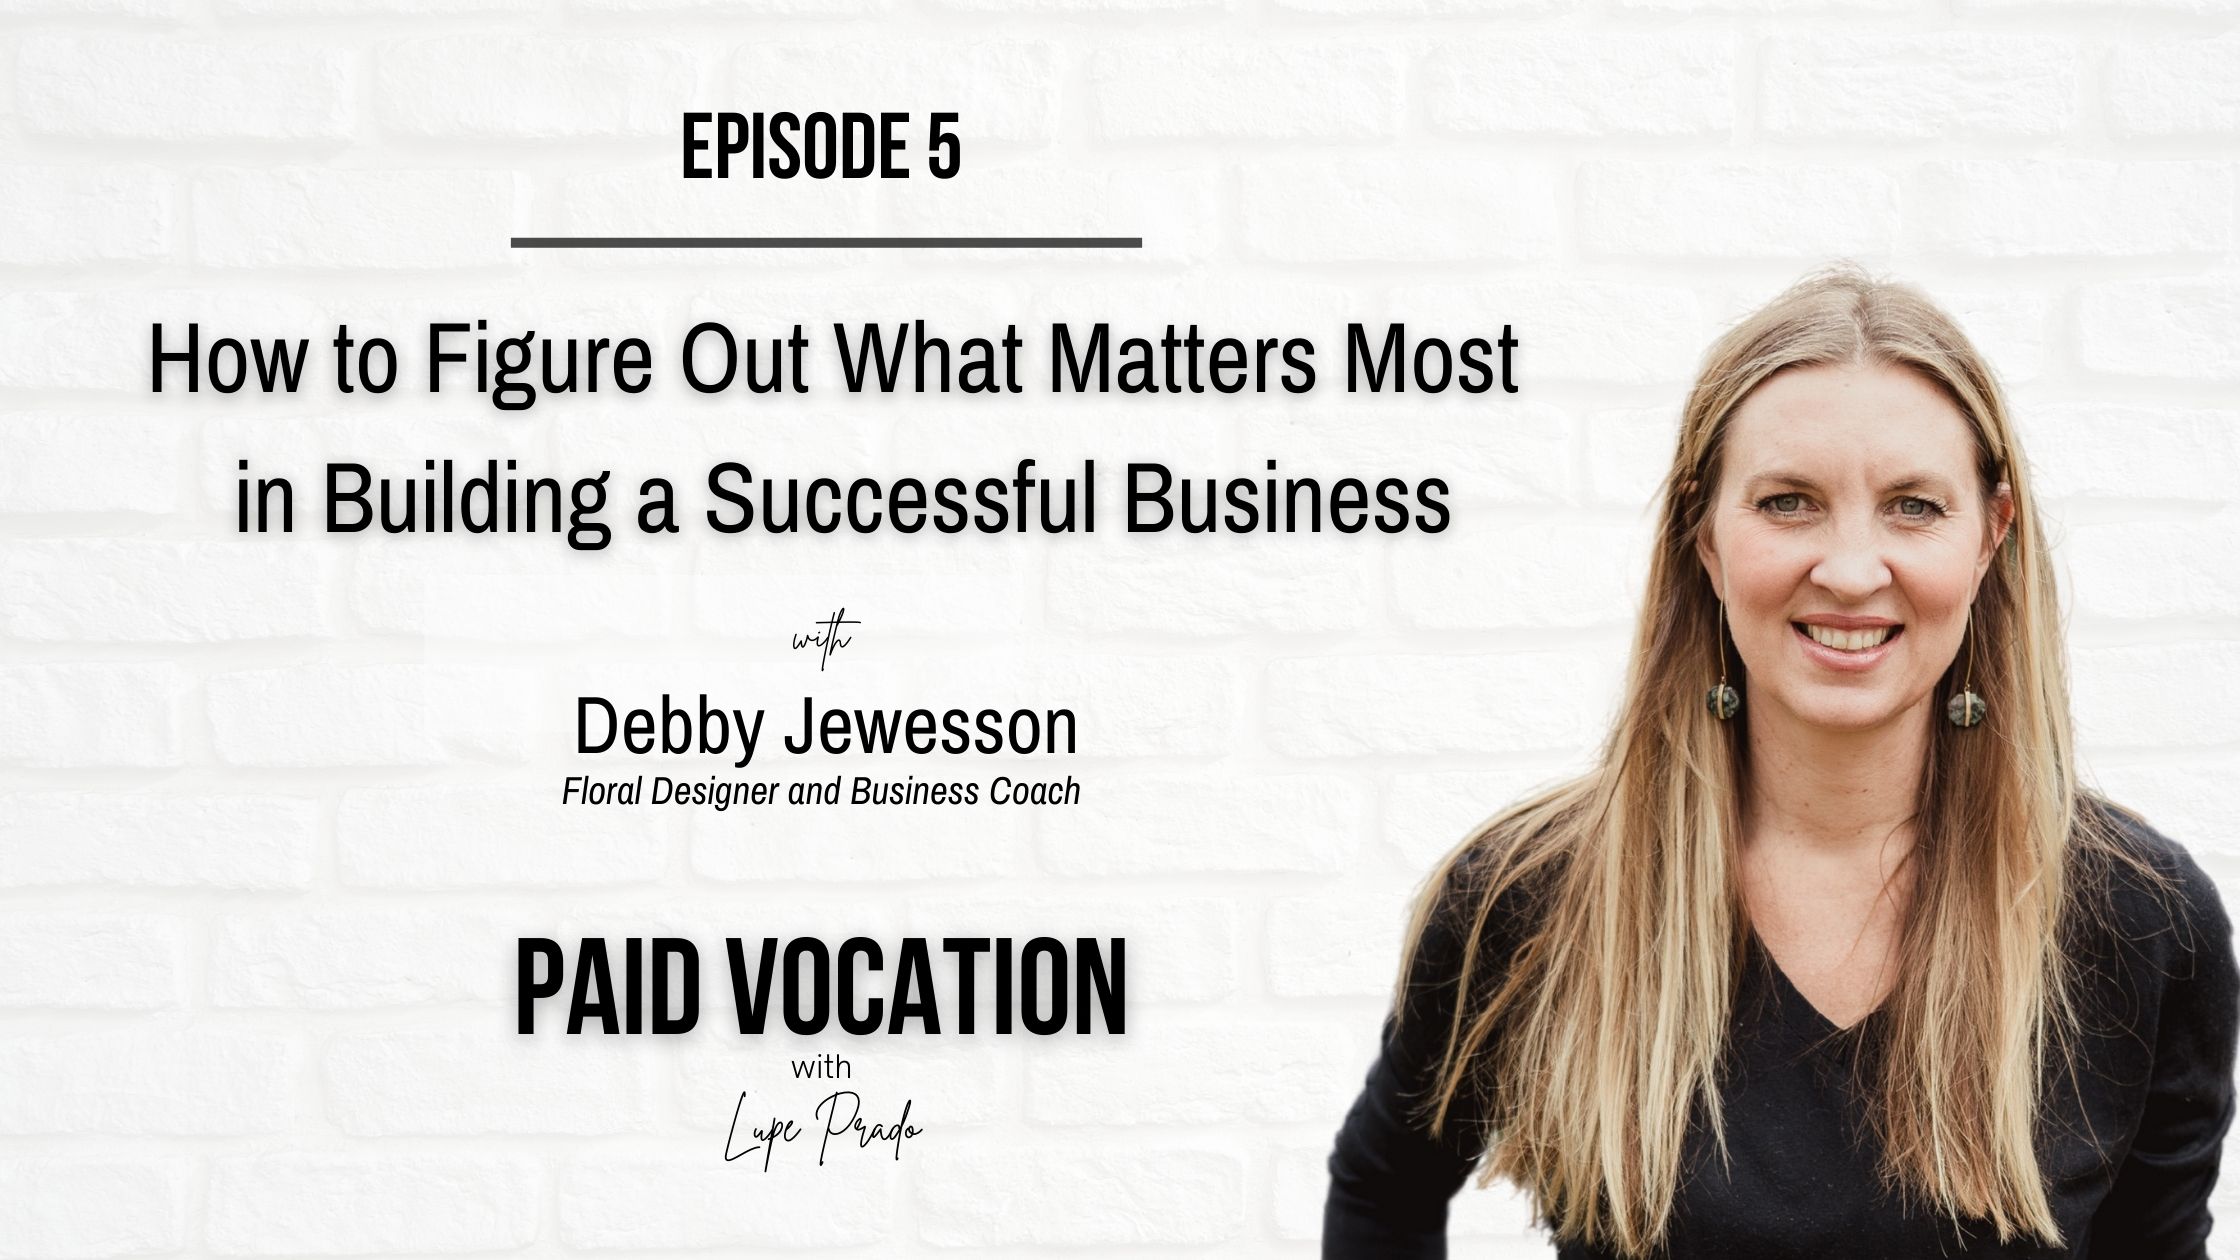 How to Figure Out What Matters Most in Building a Successful Business | Debby Jewesson